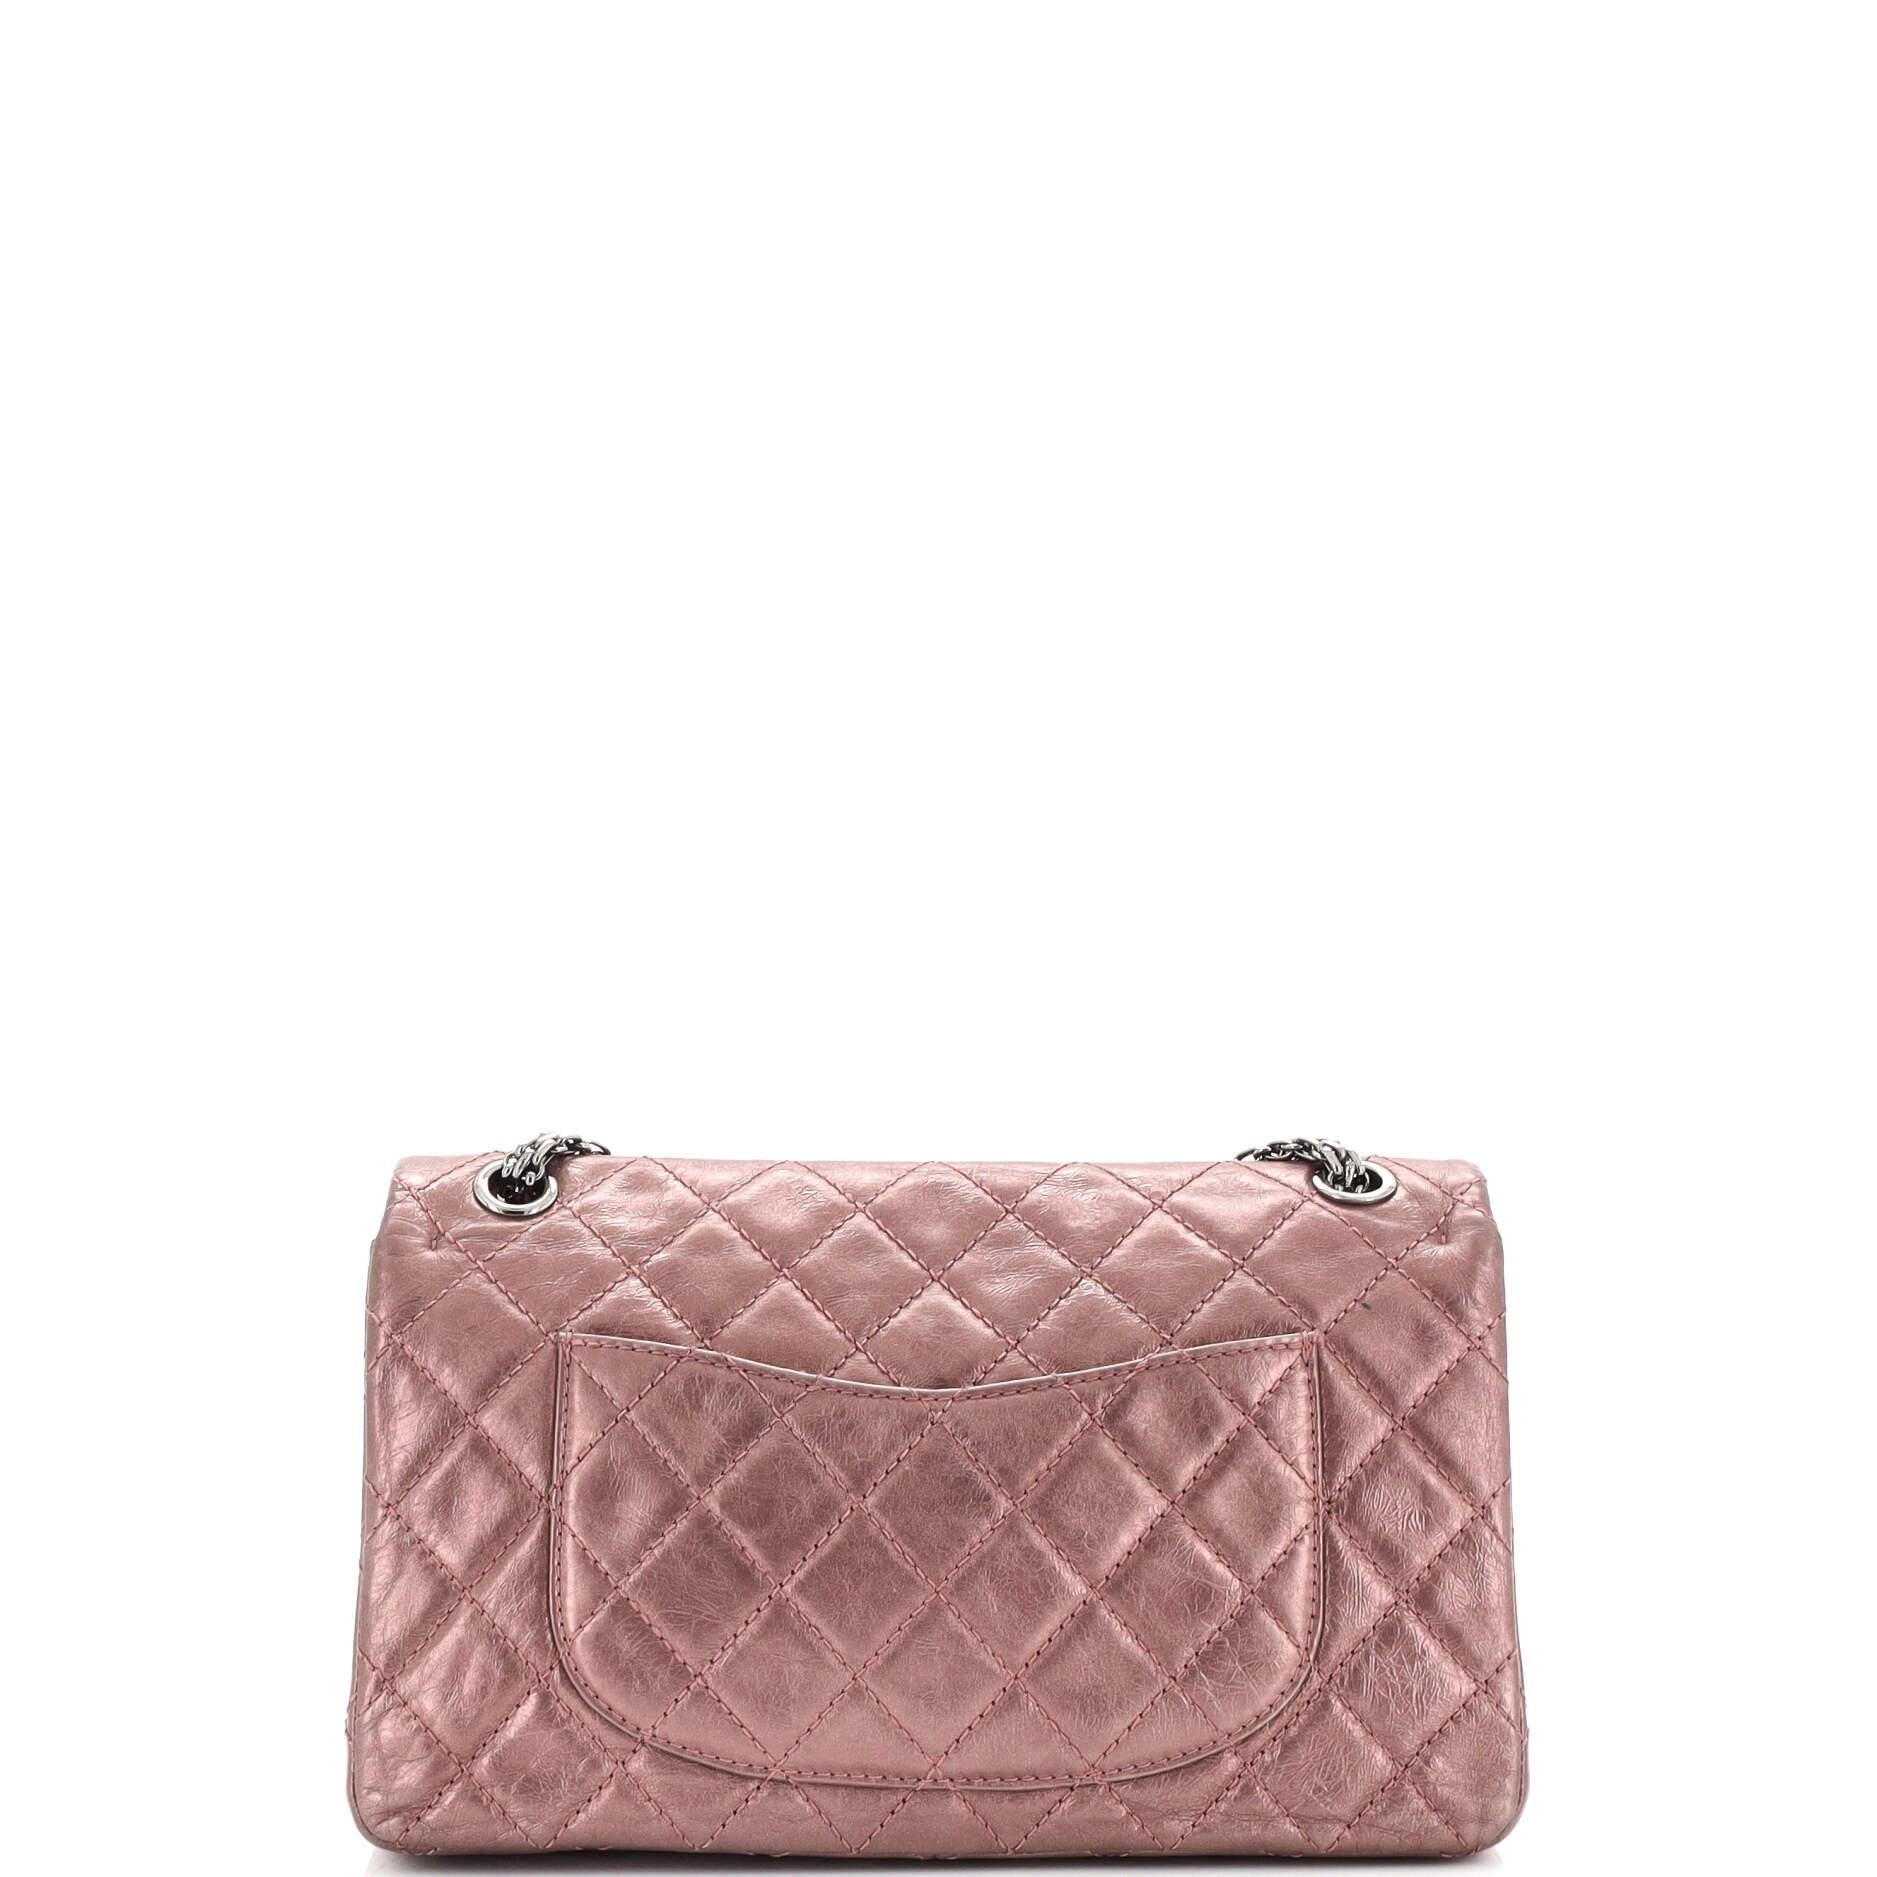 Women's or Men's Chanel Reissue 2.55 Flap Bag Quilted Aged Calfskin 226 For Sale